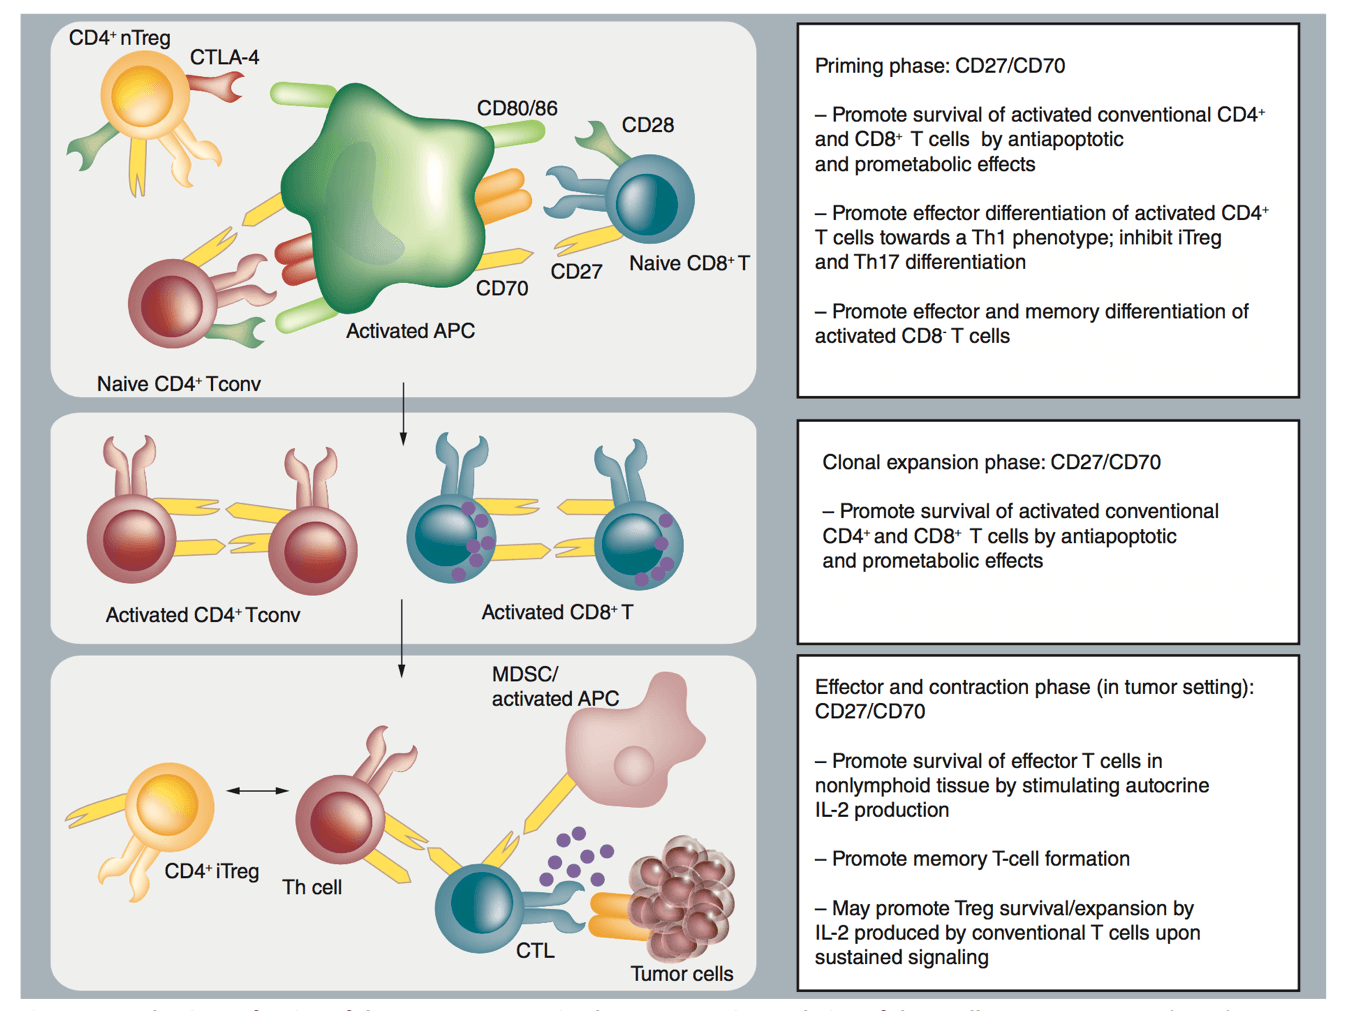 Mechanisms of action of the CD27/CD70 co-stimulatory system in the regulation of the T-cell response. (Borst J.; Ven K.V.D., 2015)